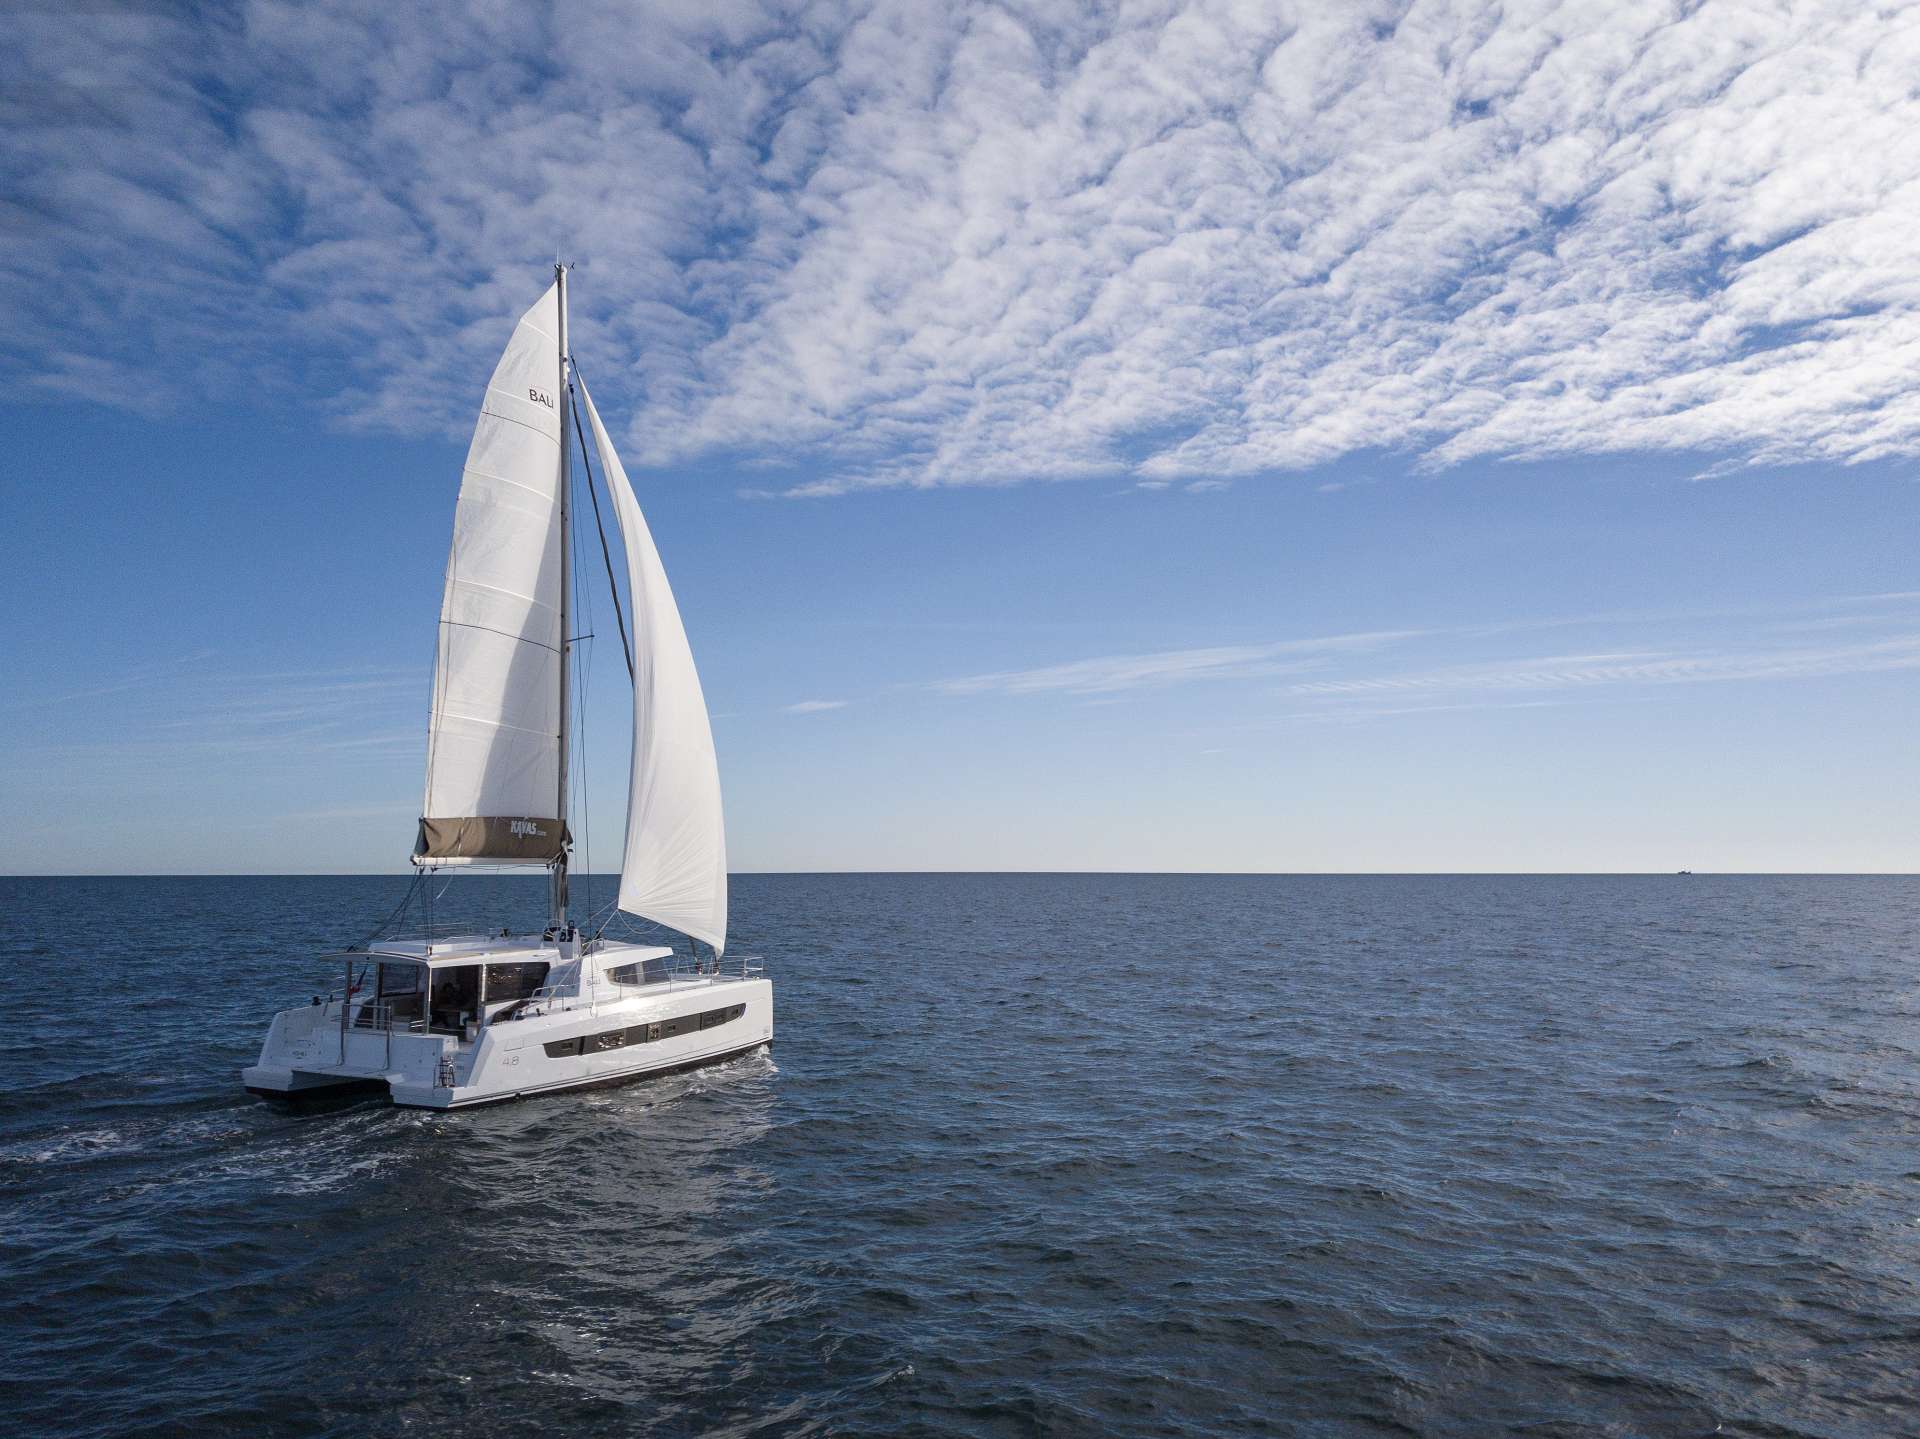 NEW 2020!!!!

Enjoy sailing with this new catamaran for 8 guests + crew. 

Bali 4.8
The BALI 4.8 THE ESSENCE OF INNOVATION
The BALI 4.8 Open Space brings together the best of the original characteristics that make up the DNA of BALI catamarans.

In addition to the recognized innovations such as the rigid forward cockpit with lounge area and sunbathing area; the new platform linking the two sugarscoops with large bench seat and lockers; the large tilt and-turn door and sliding windows; and a panoramic relaxation area on the coachroof, the BALI 4.8 offers, as does the 5.4, new access to the forward cockpit by an interior door and cabins by panels opening onto the aft cockpit, and a 6 cabin / 6 bathroom version unheard of on a 48 footer.